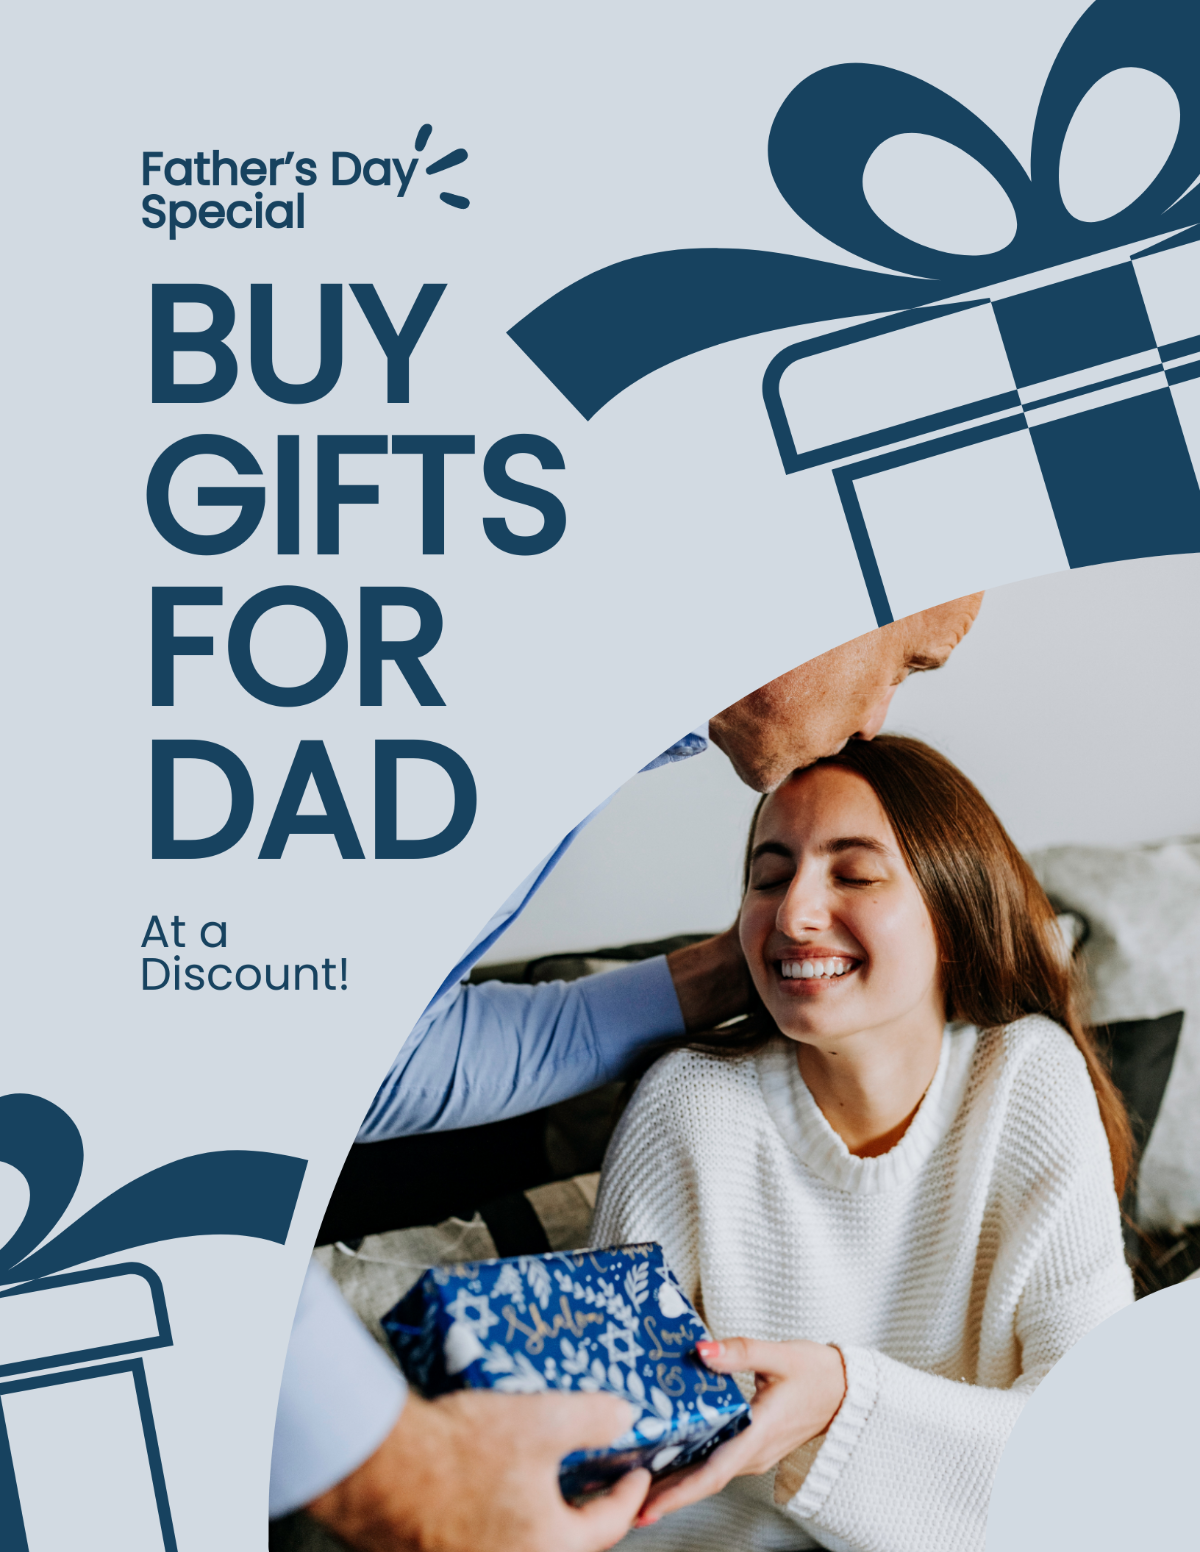 Father's Day Sale Flyer Template